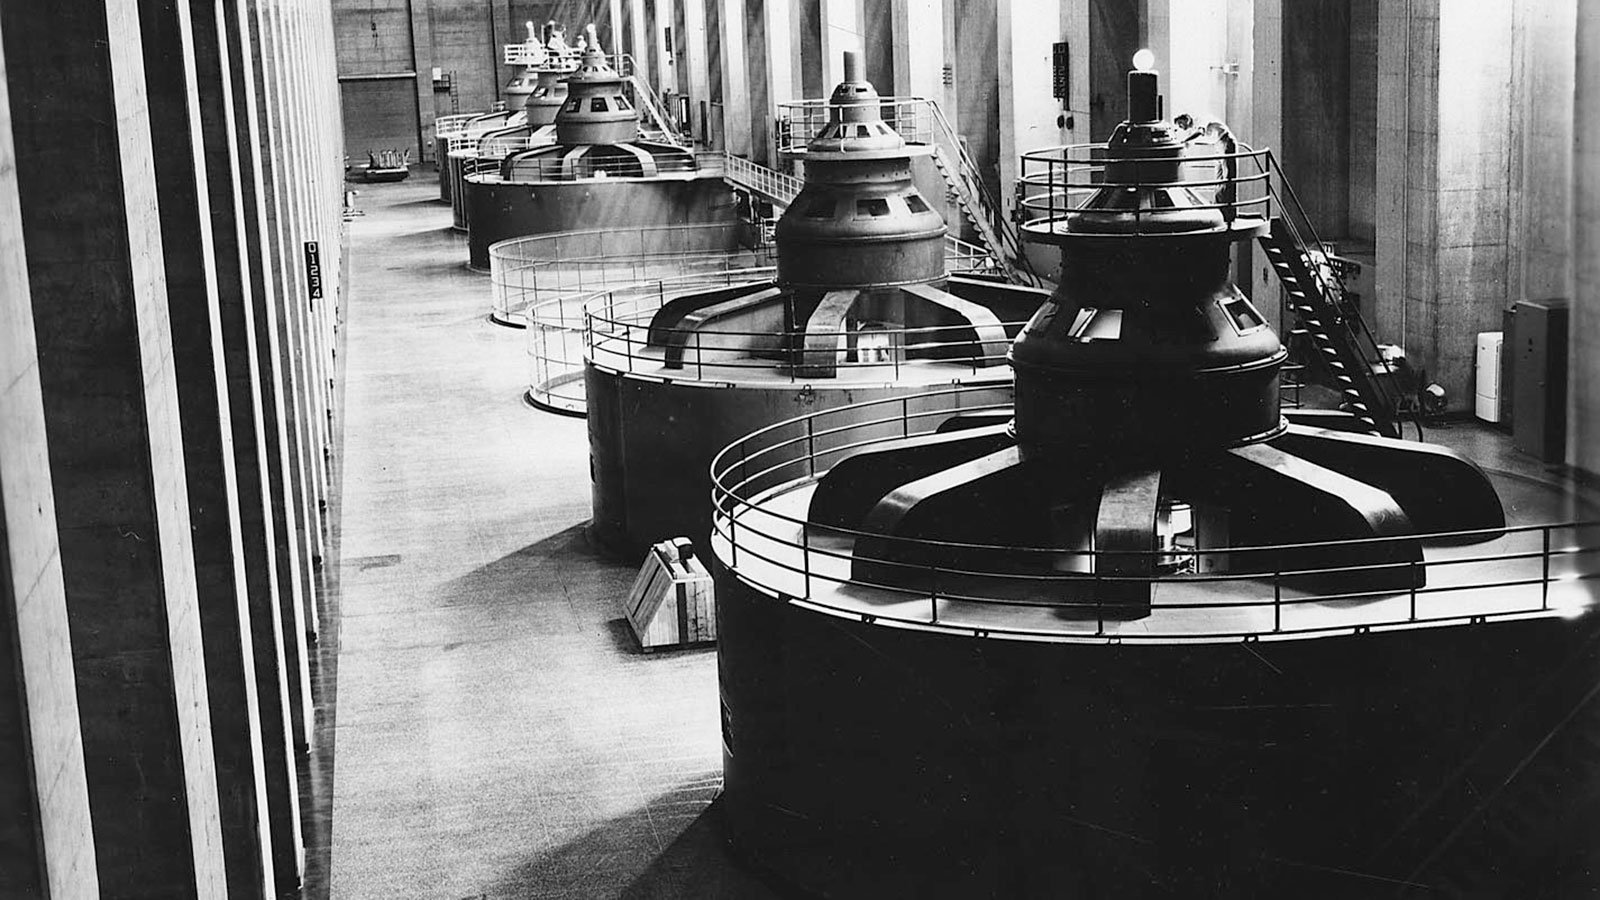 The first electric generator at Hoover Dam went into operation on October 26, 1936